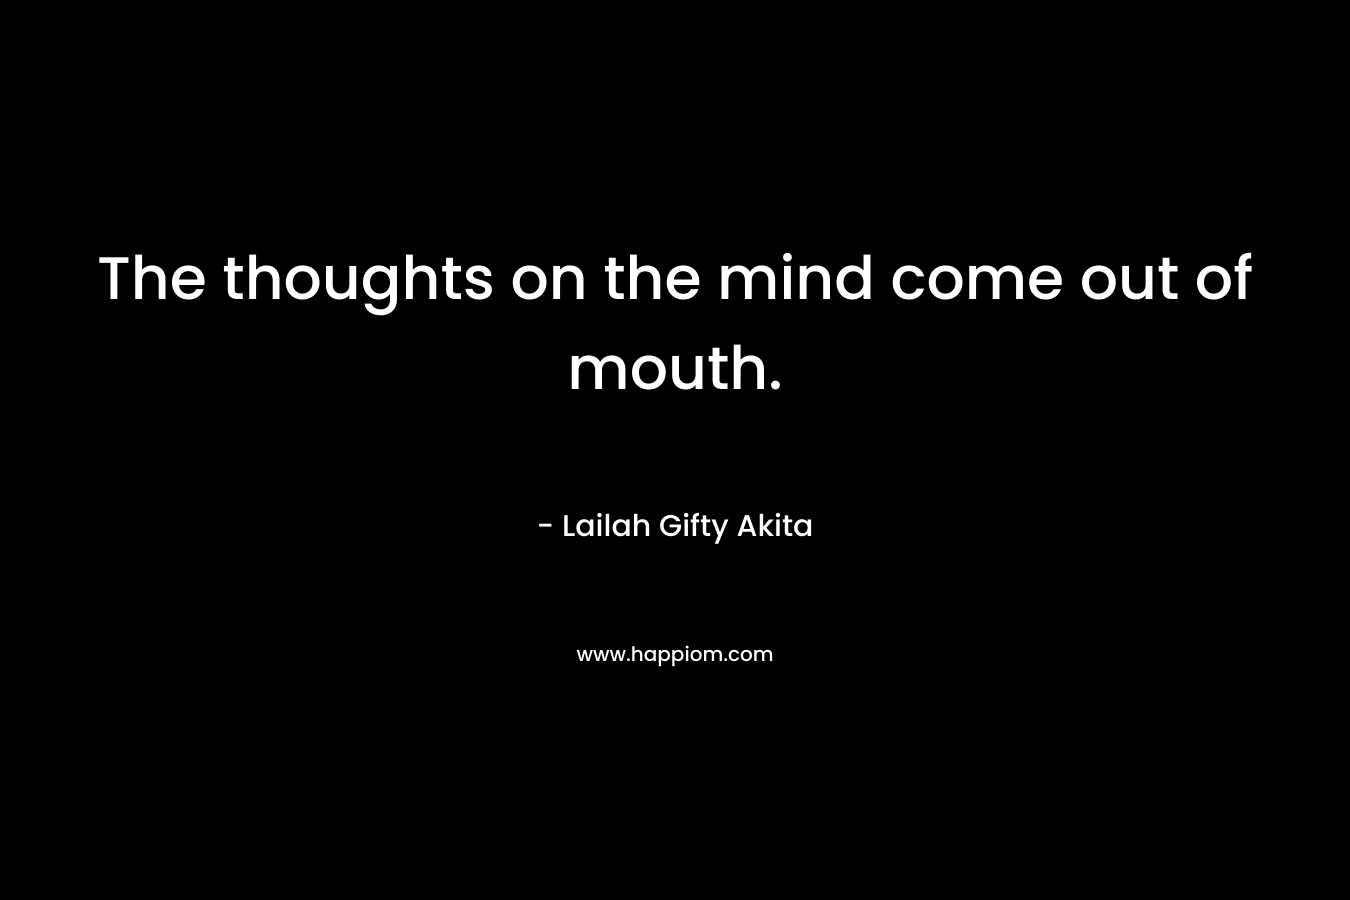 The thoughts on the mind come out of mouth.